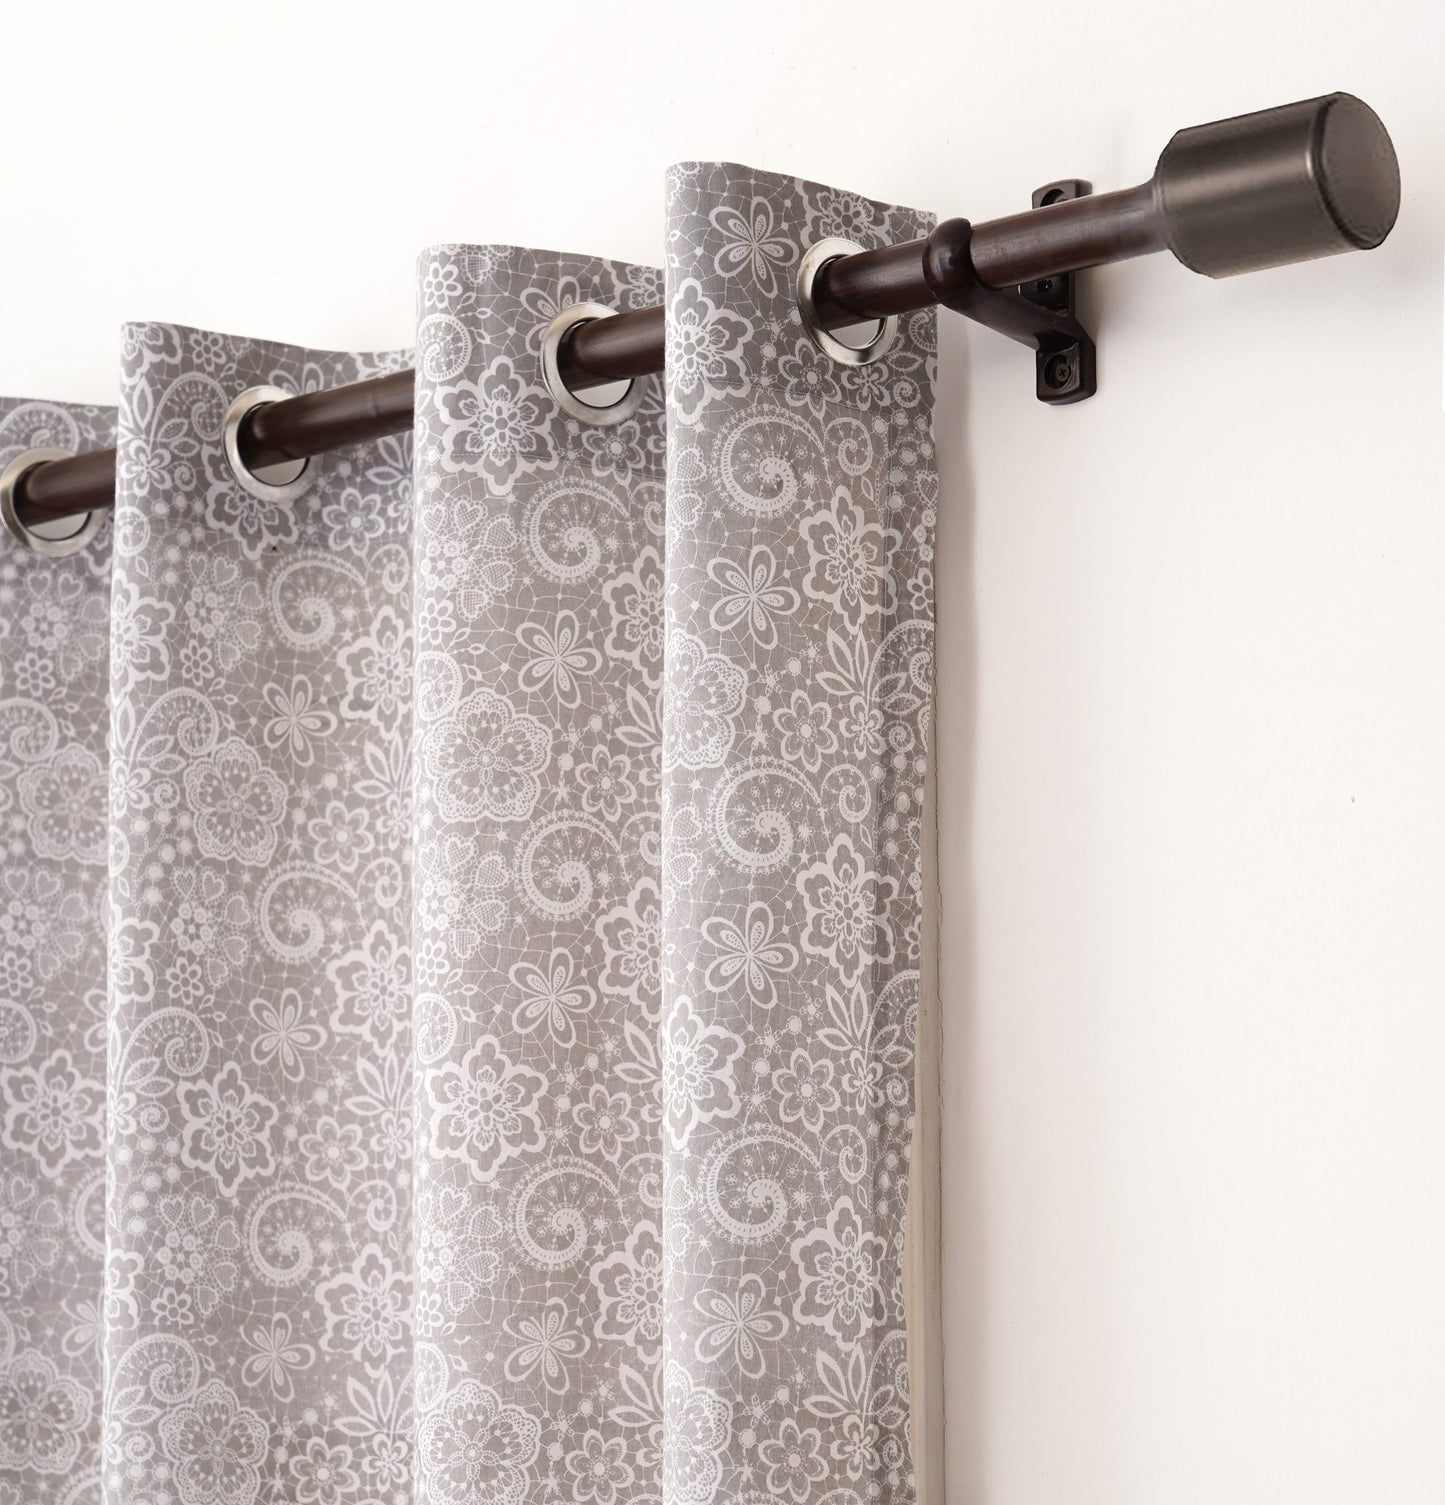 LACE print - Grey cotton voile sheer curtain panel